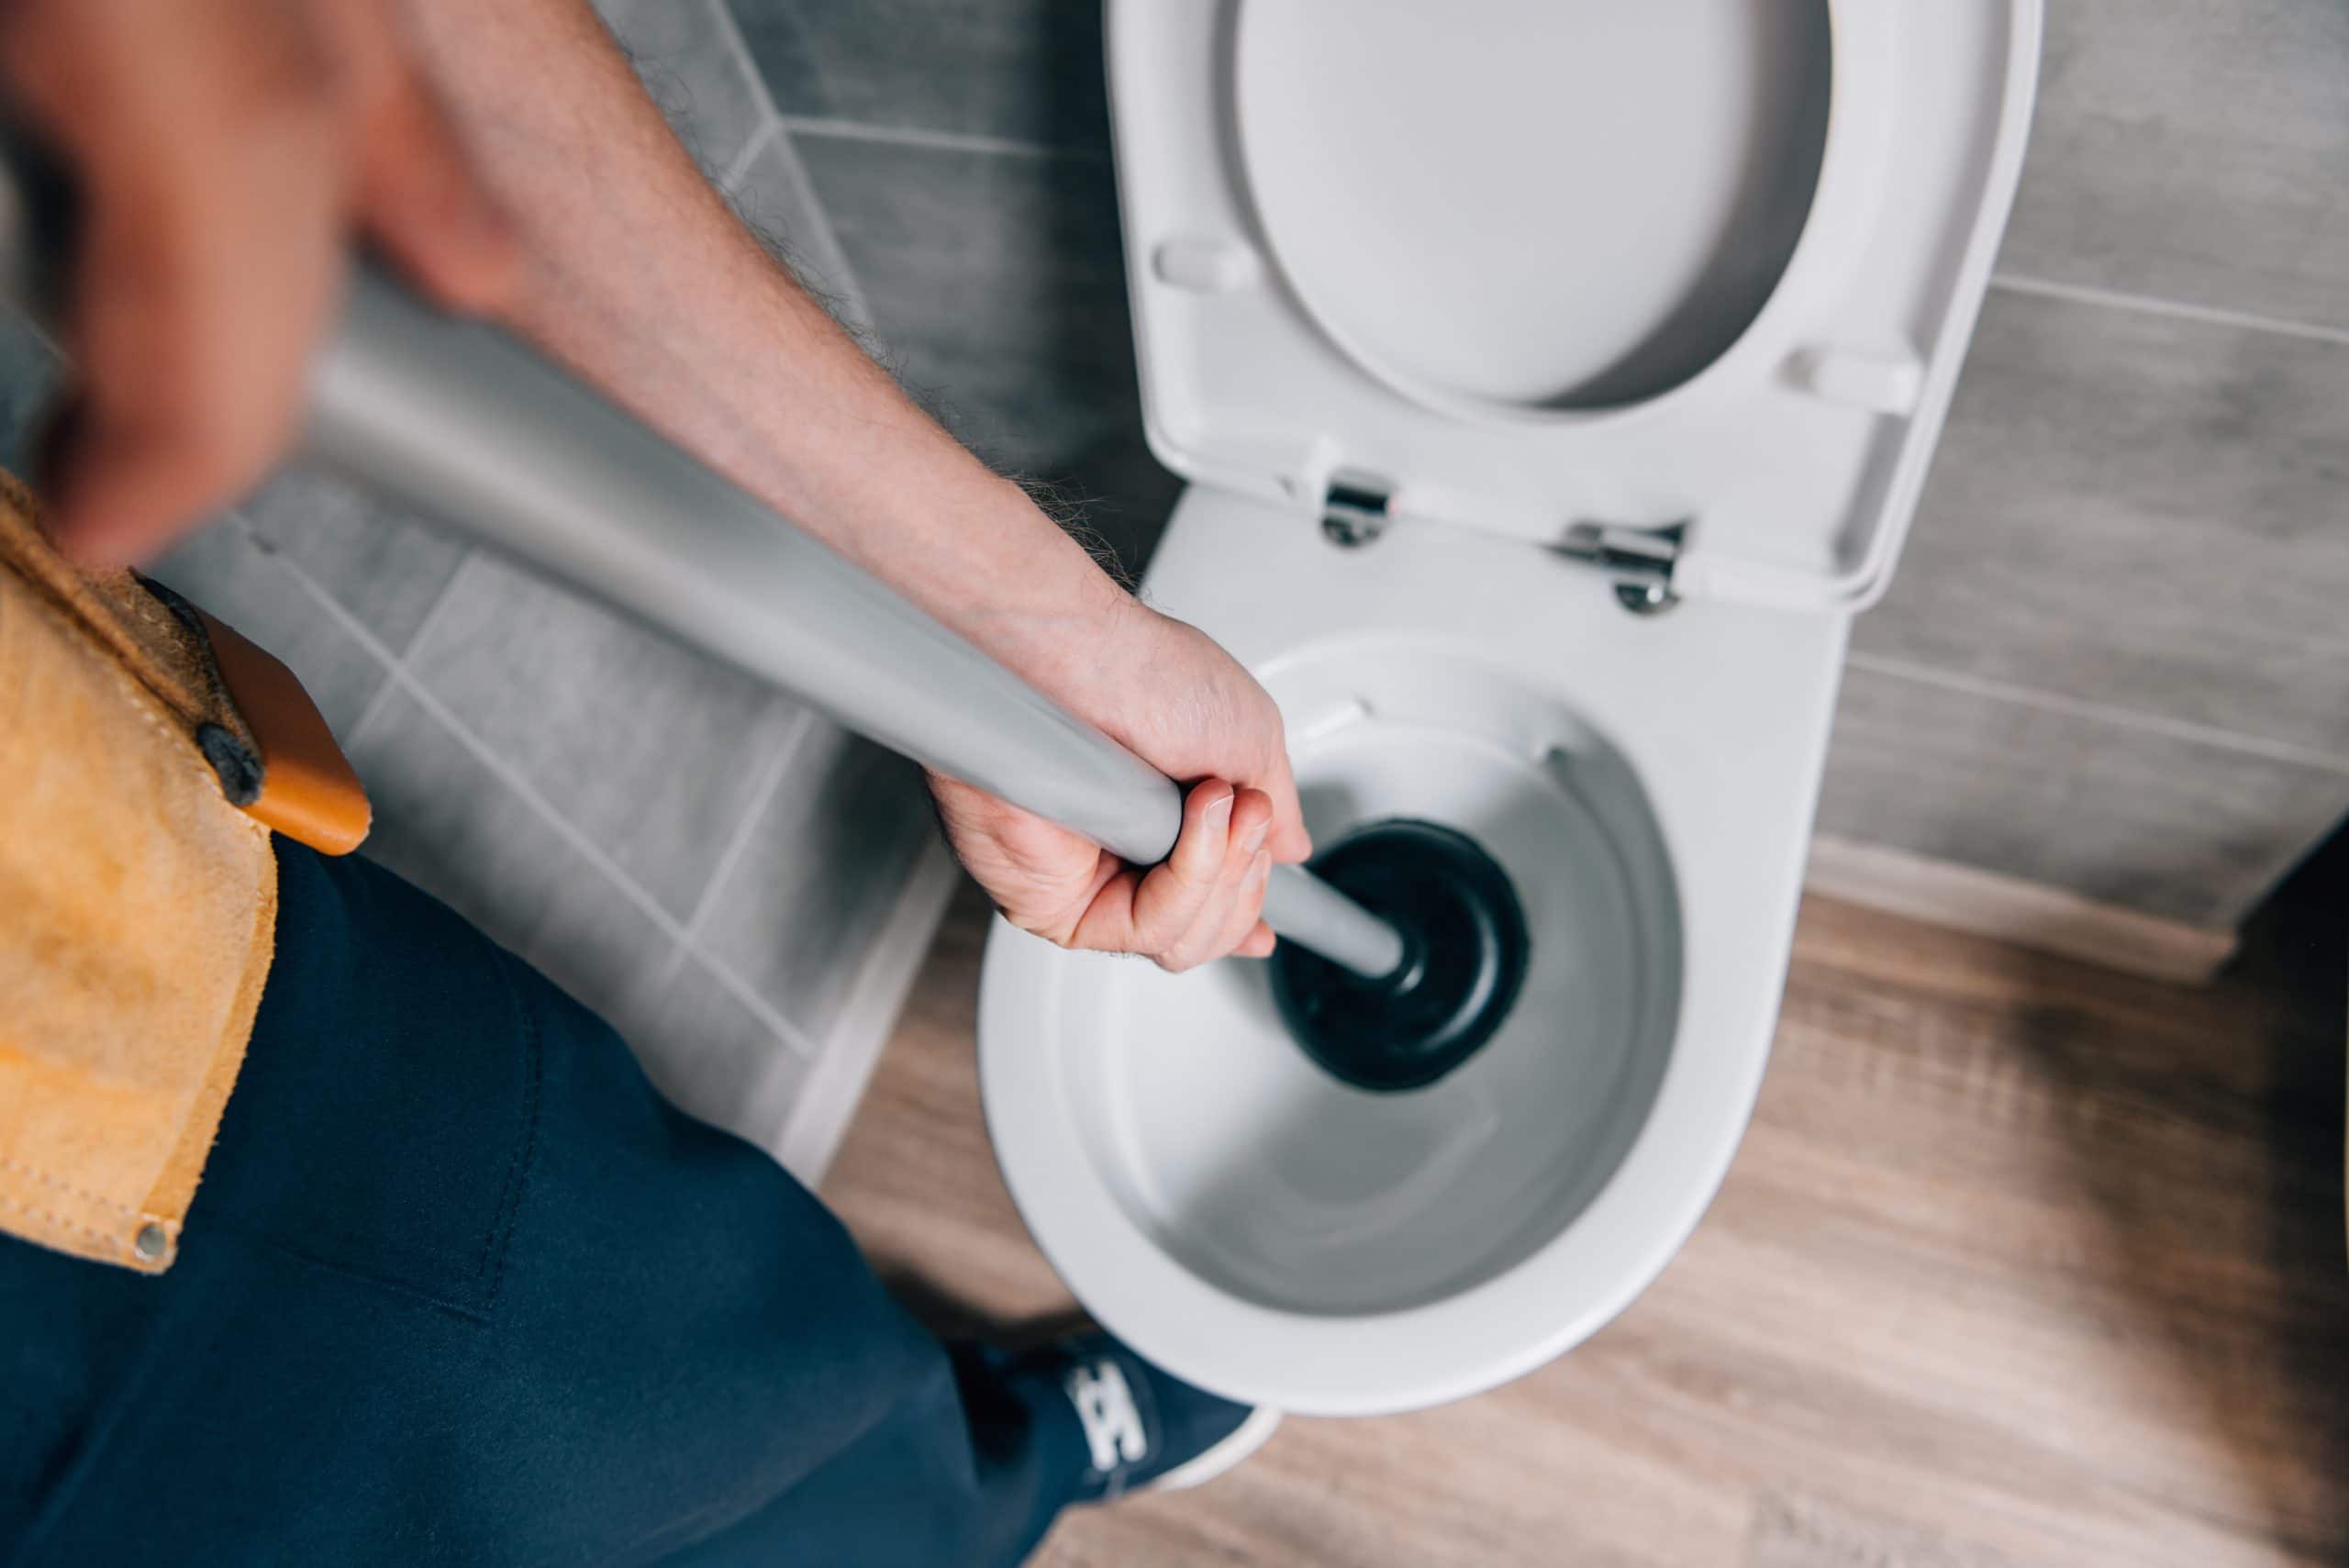 Clogged Toilets Fact vs. Fiction: The Best Way to Unclog a Toilet -  FloHawks Plumbing + Septic